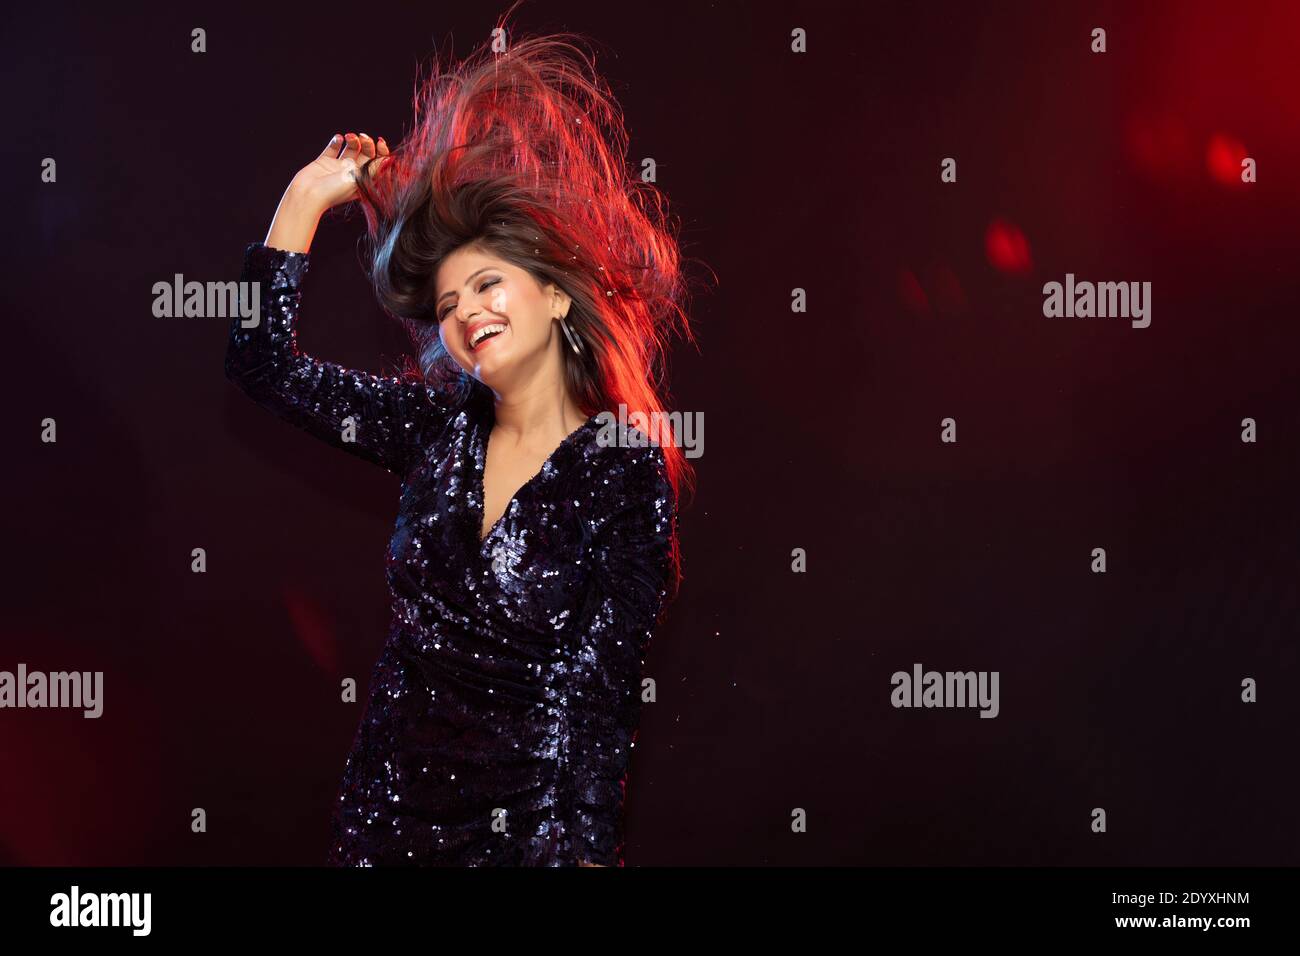 Happy Young woman Dancing celebrating the New Year party Stock Photo